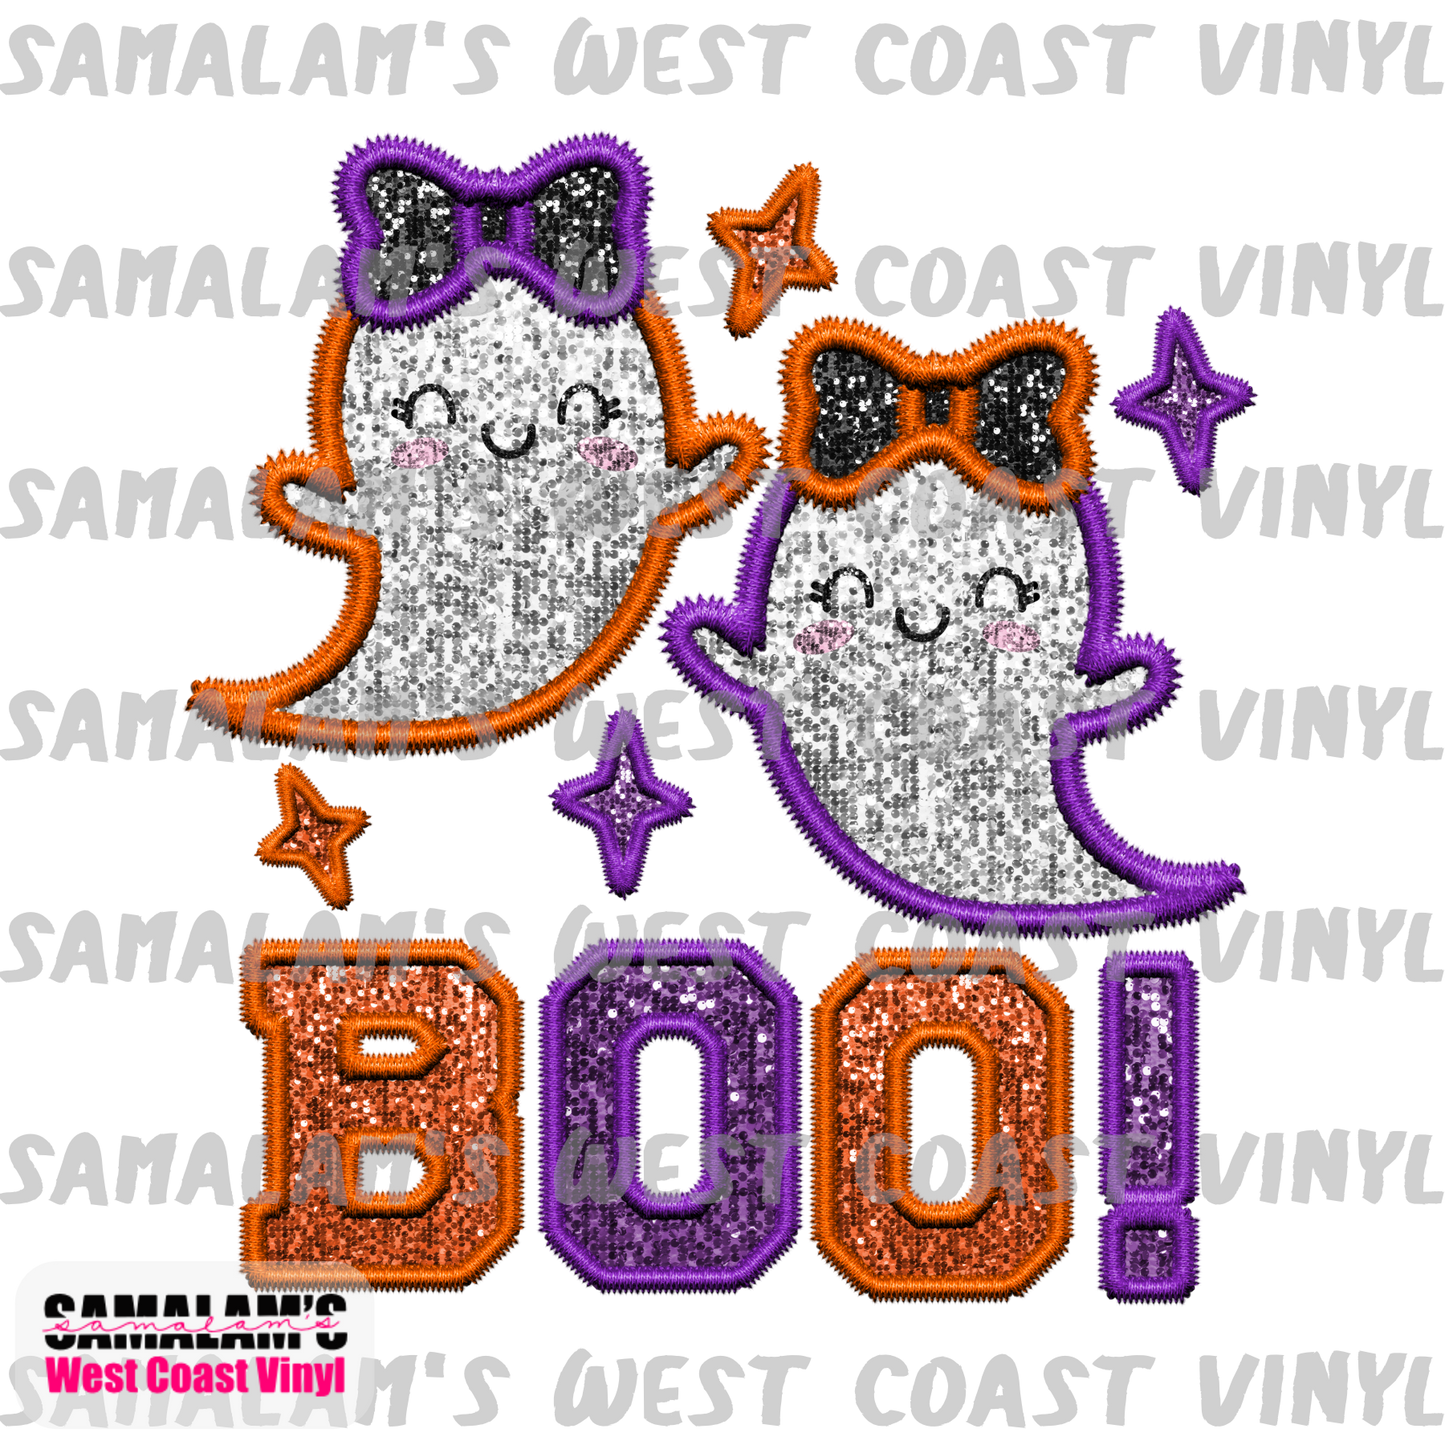 Embroidery - Boo - Orange Purple - Clear Cast Decal